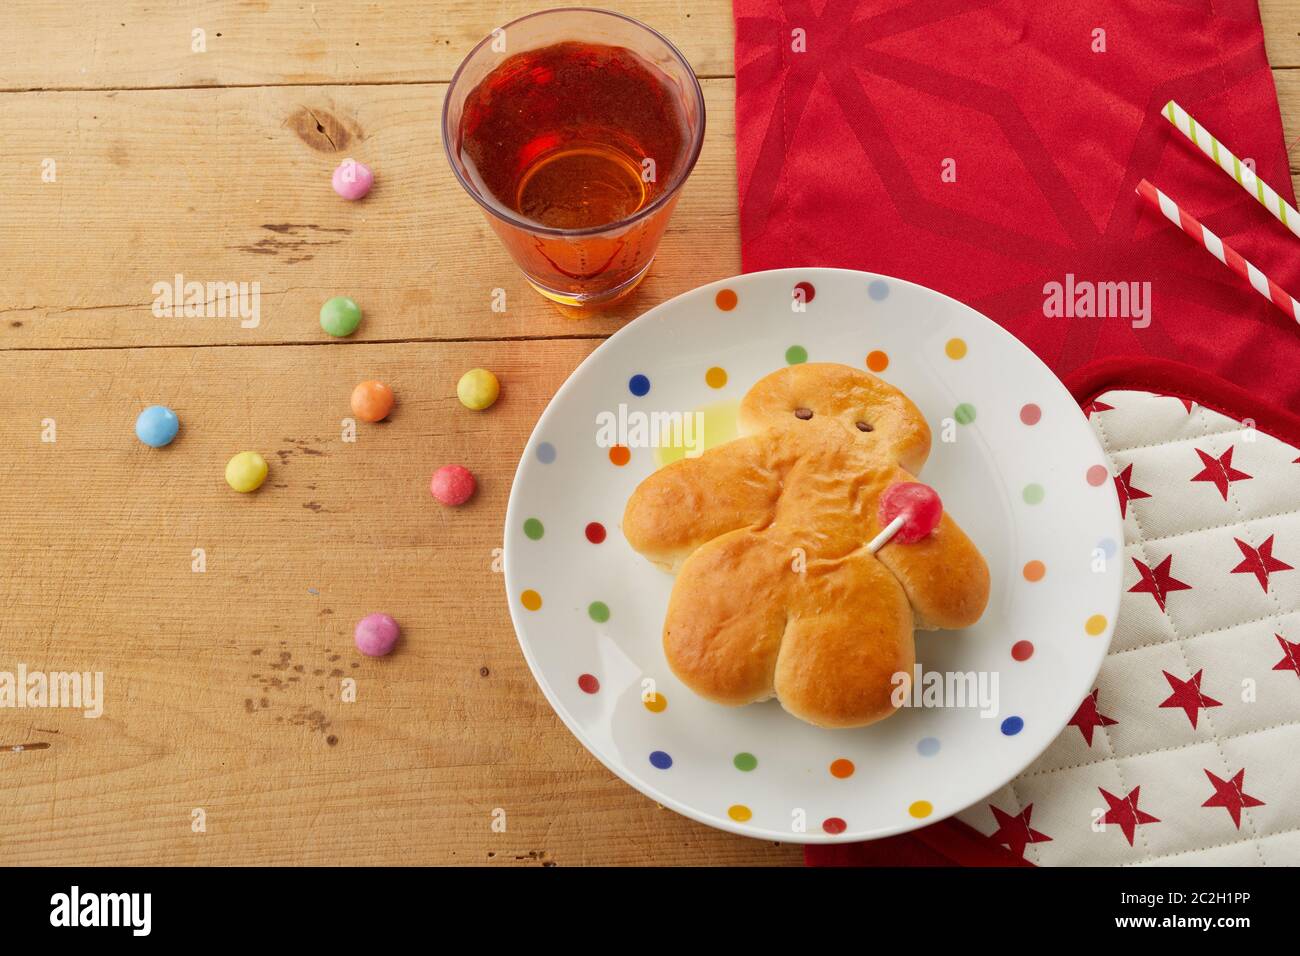 Freshly baked mini Stuten man, a German sweet bread for St Nicholas celebrations, on a red themed festive table with candy and juice Stock Photo